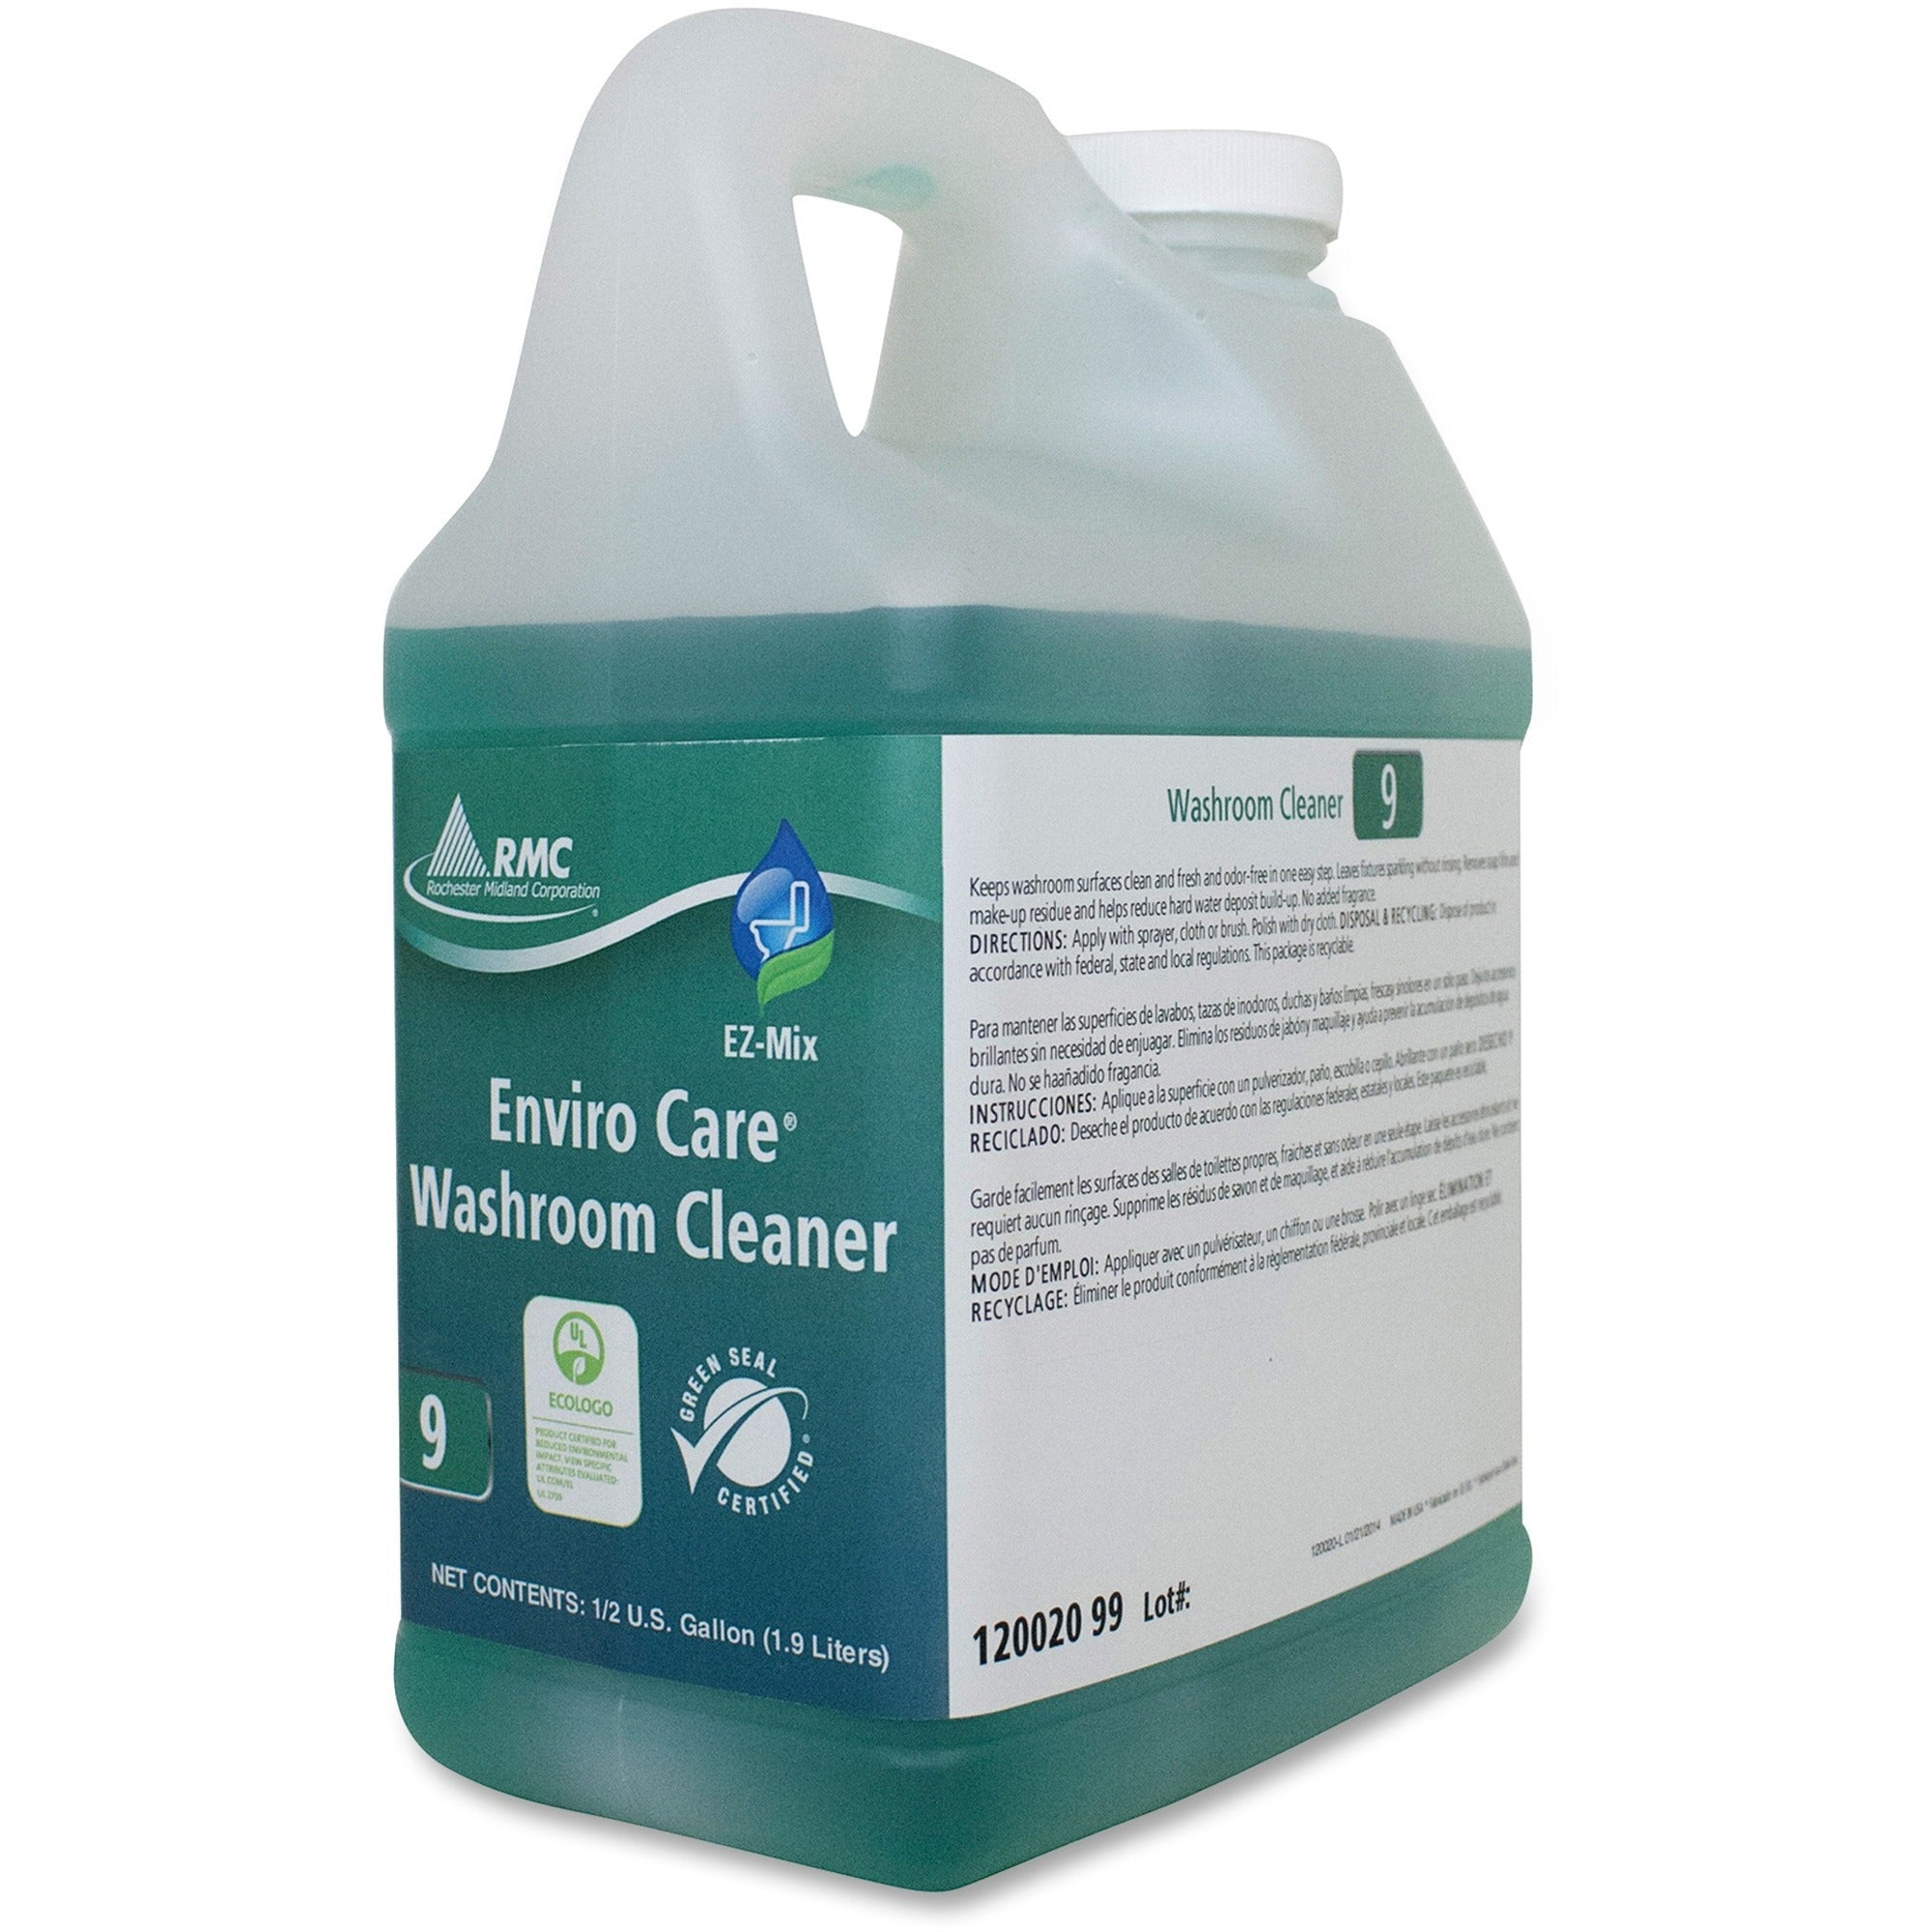 RMC Enviro Care Washroom Cleaner - For Multipurpose - Concentrate - 64.2 fl oz (2 quart) - 4 / Carton - Bio-based, Non-toxic, Phosphate-free - Green - 